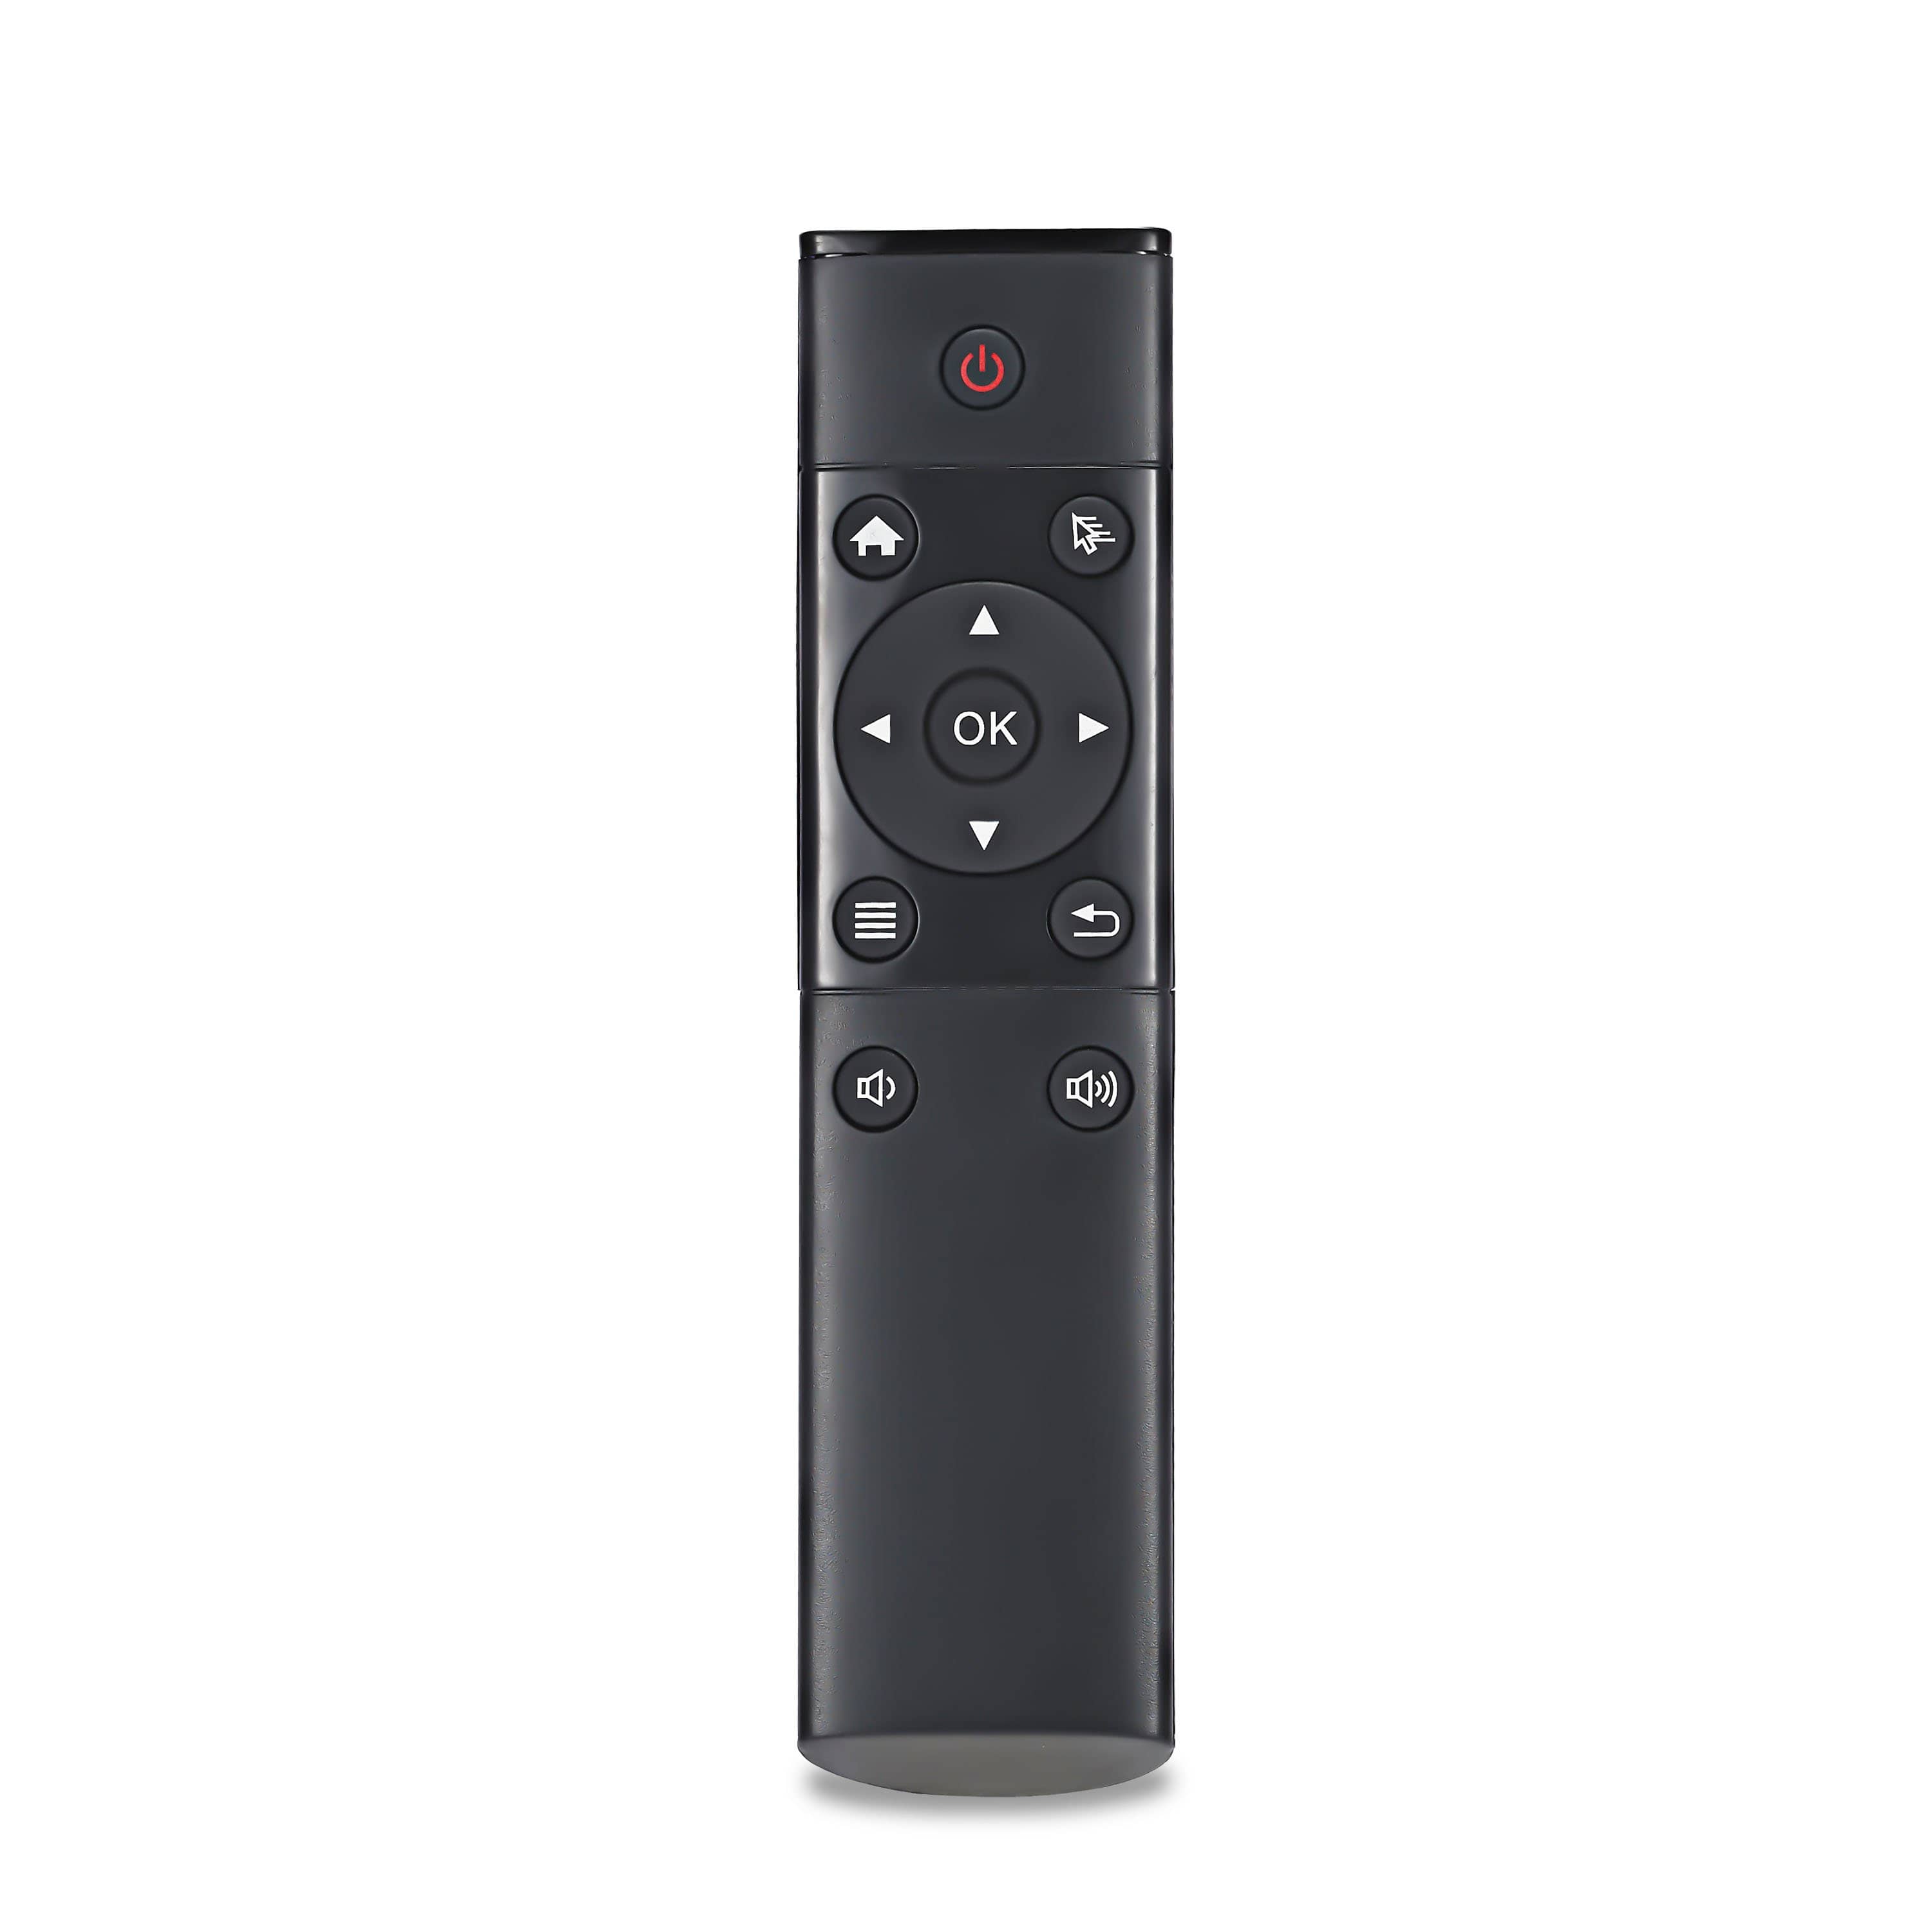 LG AKB73655833 - replacement remote control - $12.0 : REMOTE